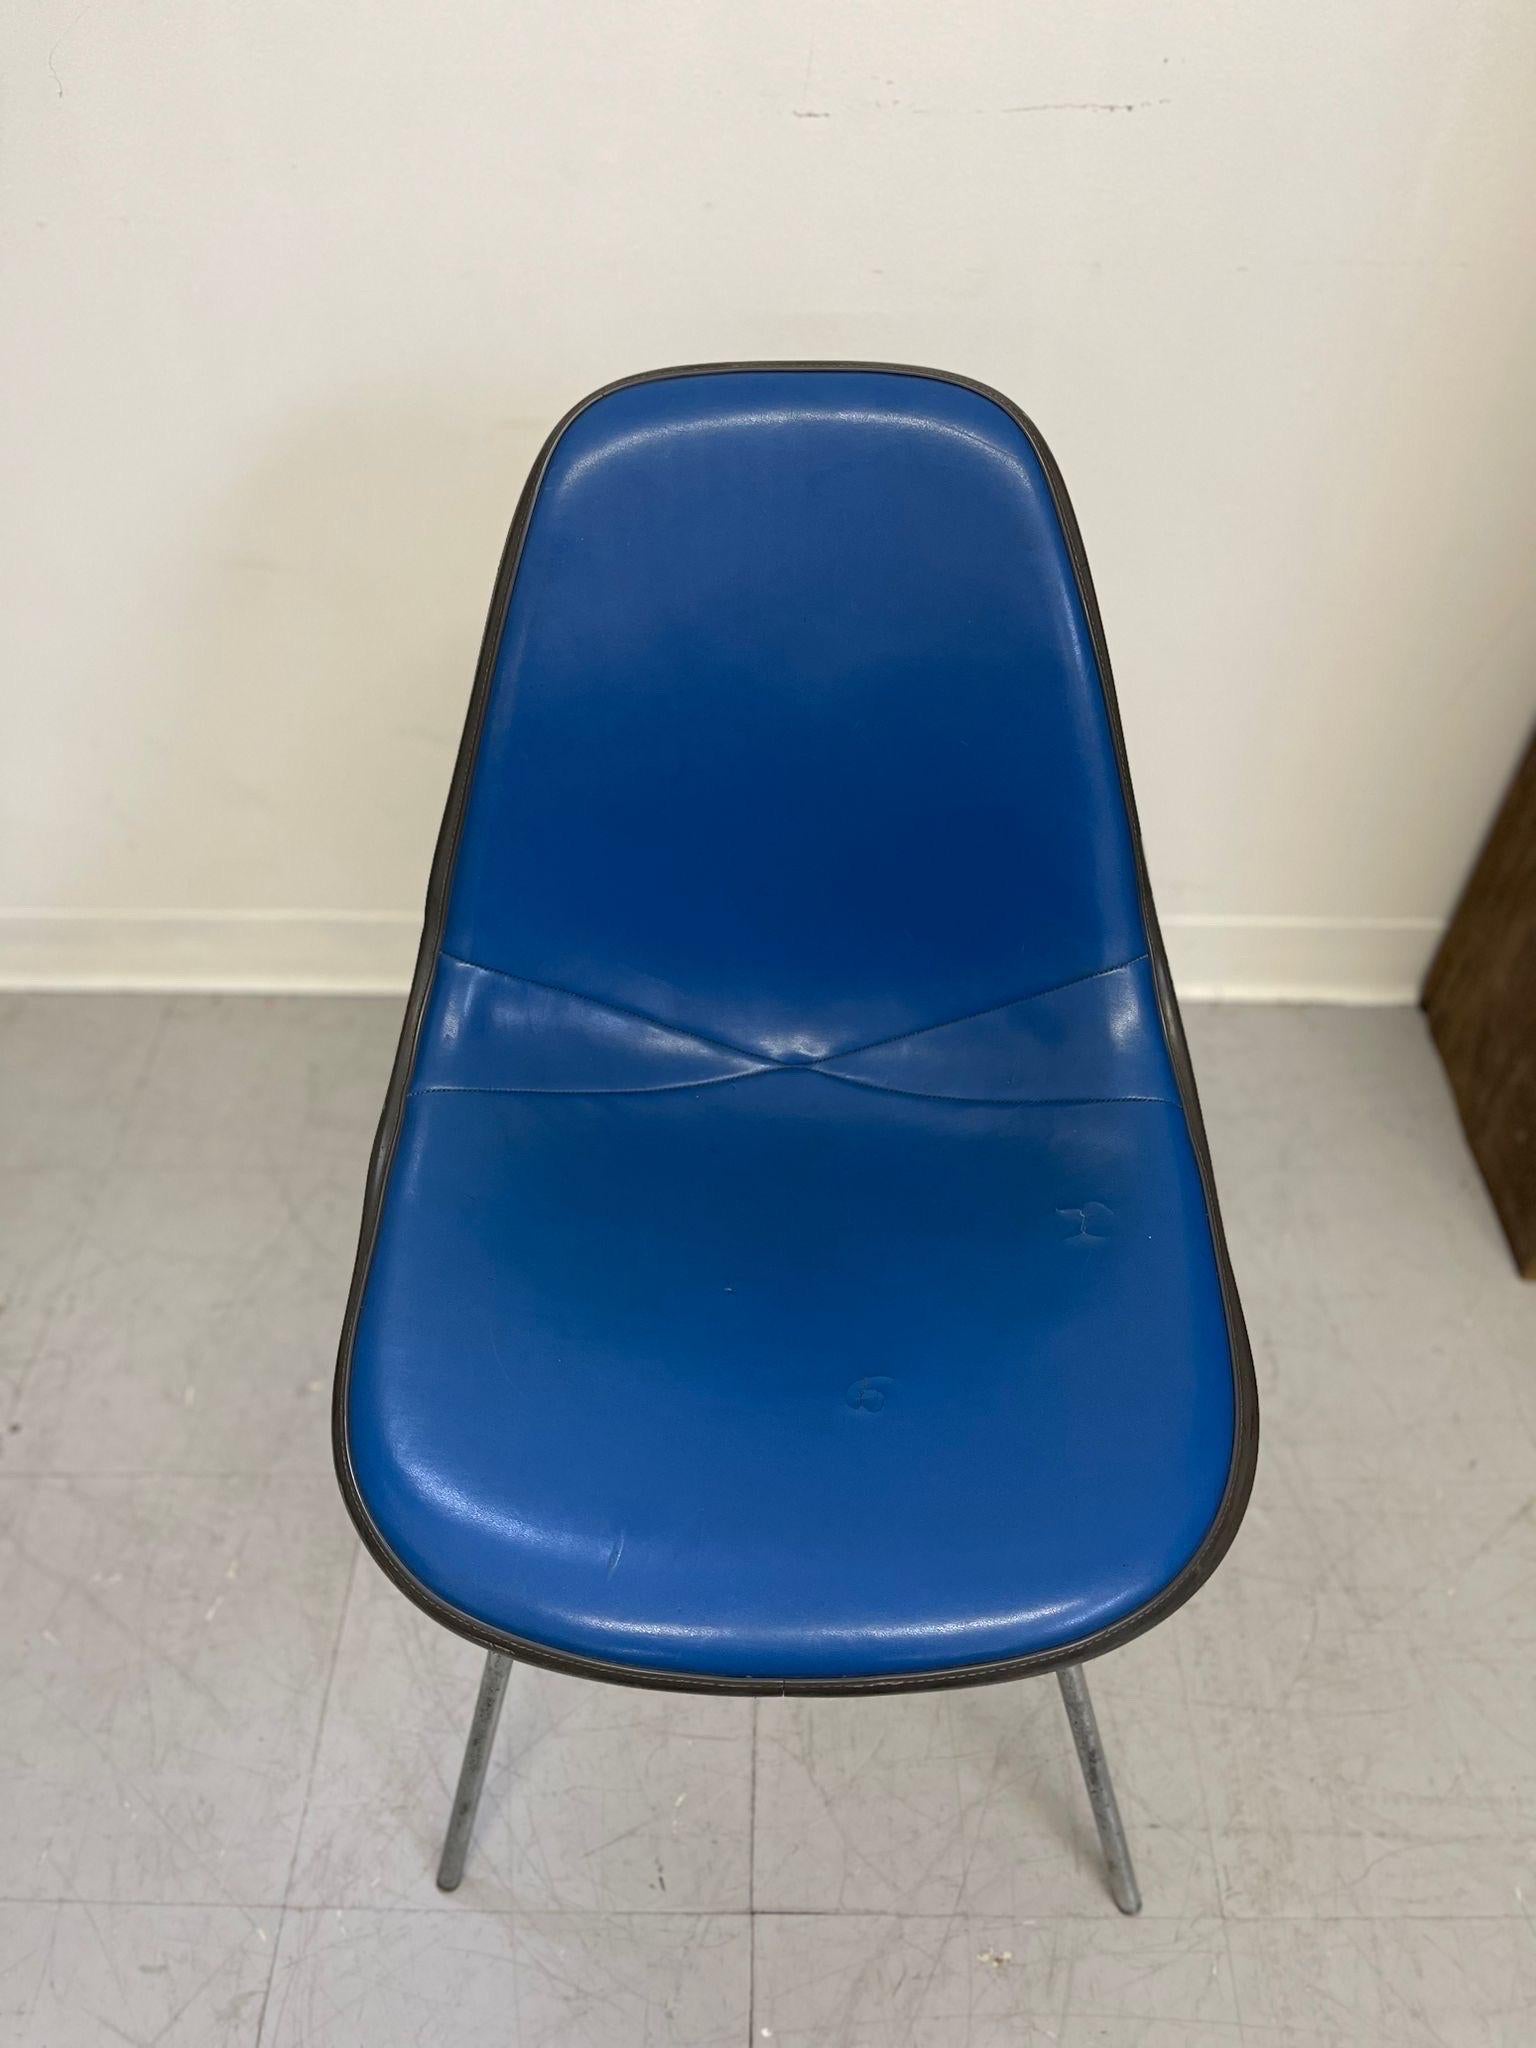 Late 20th Century Vintage Mid Century Modern Herman Miller Blue Chair For Sale